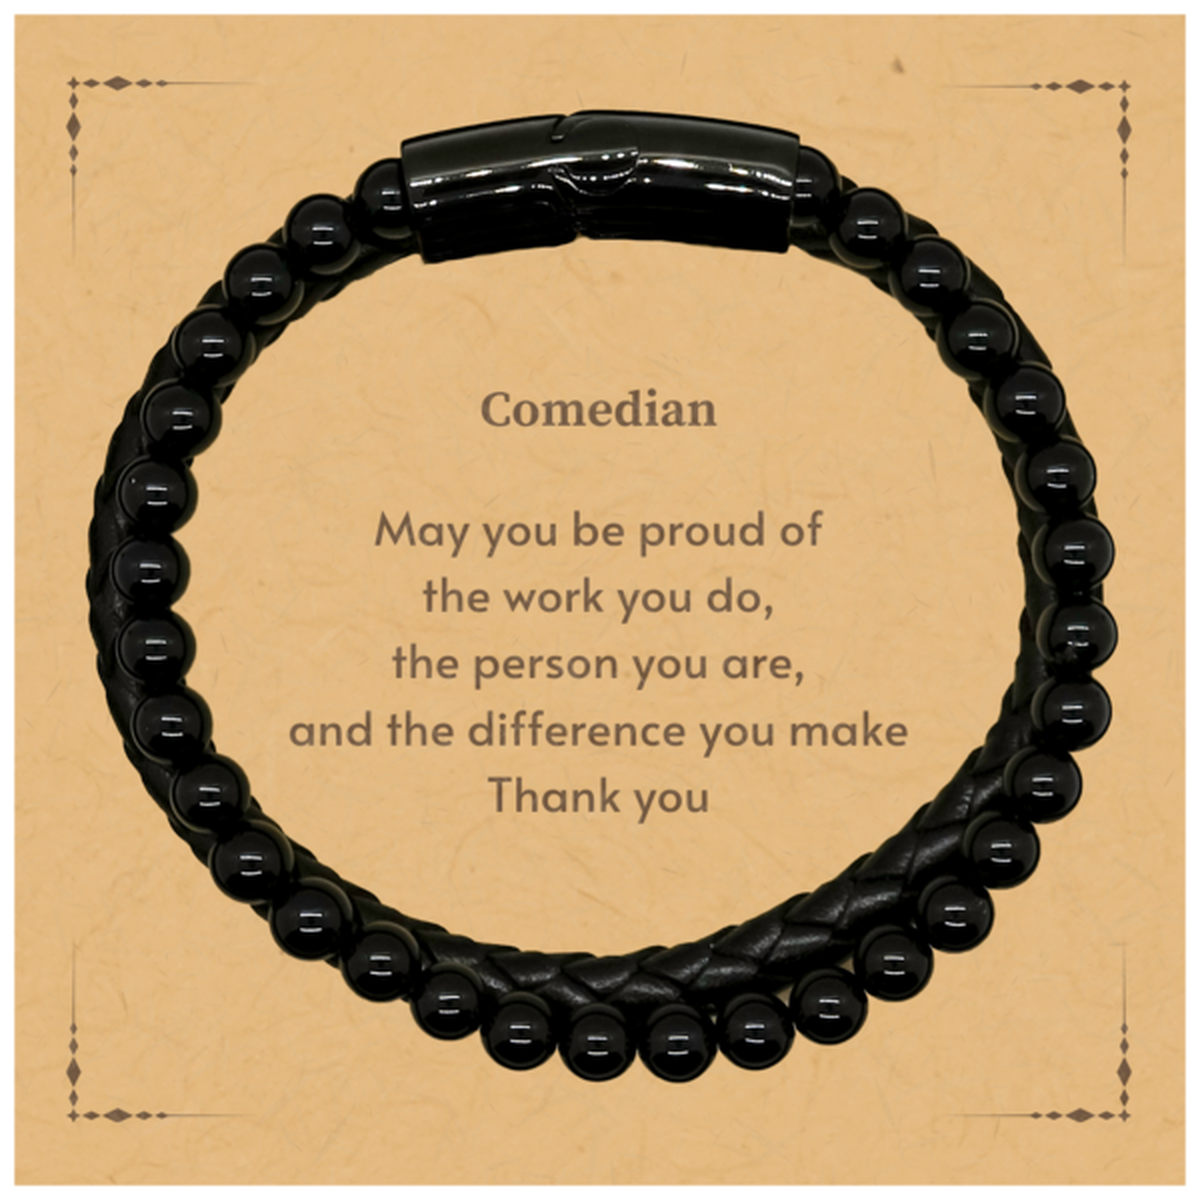 Heartwarming Stone Leather Bracelets Retirement Coworkers Gifts for Comedian, Comedian May You be proud of the work you do, the person you are Gifts for Boss Men Women Friends